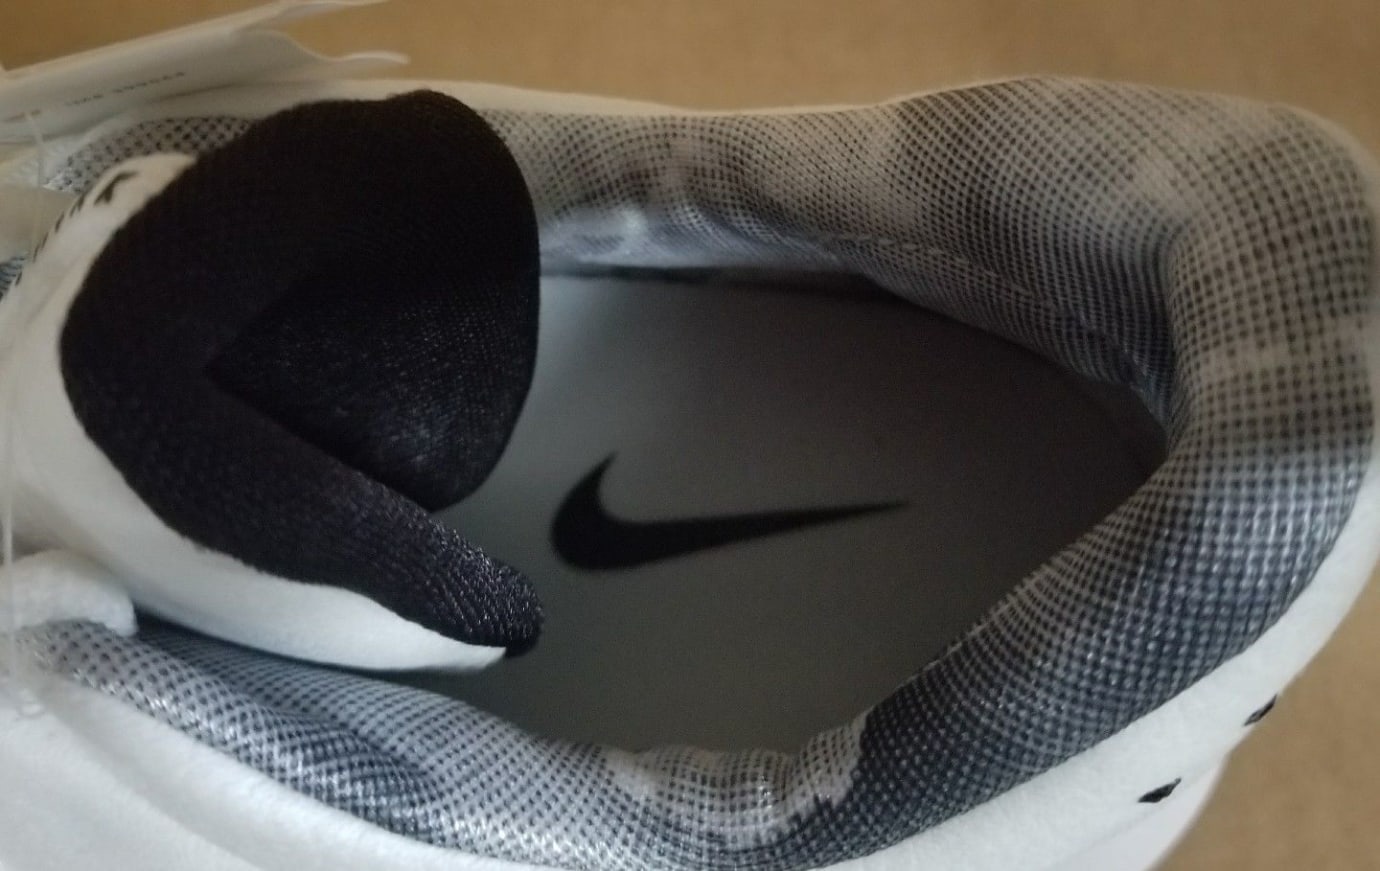 mercenary filter Soaked Nike Hyperdunk X Low TB White/Black AR0463-100 Images | Sole Collector